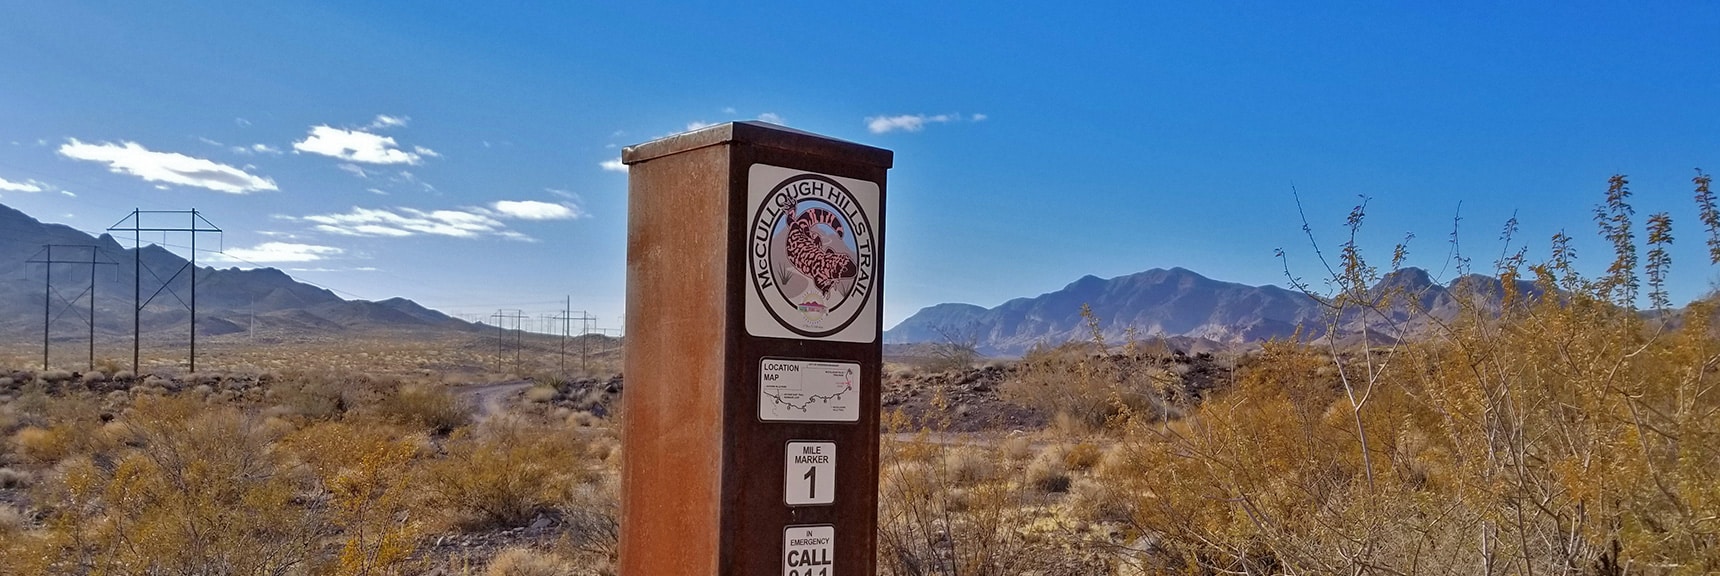 Mile 1 Marker on the McCullough Hills Trail | McCullough Hills Trail in Sloan Canyon National Conservation Area, Nevada